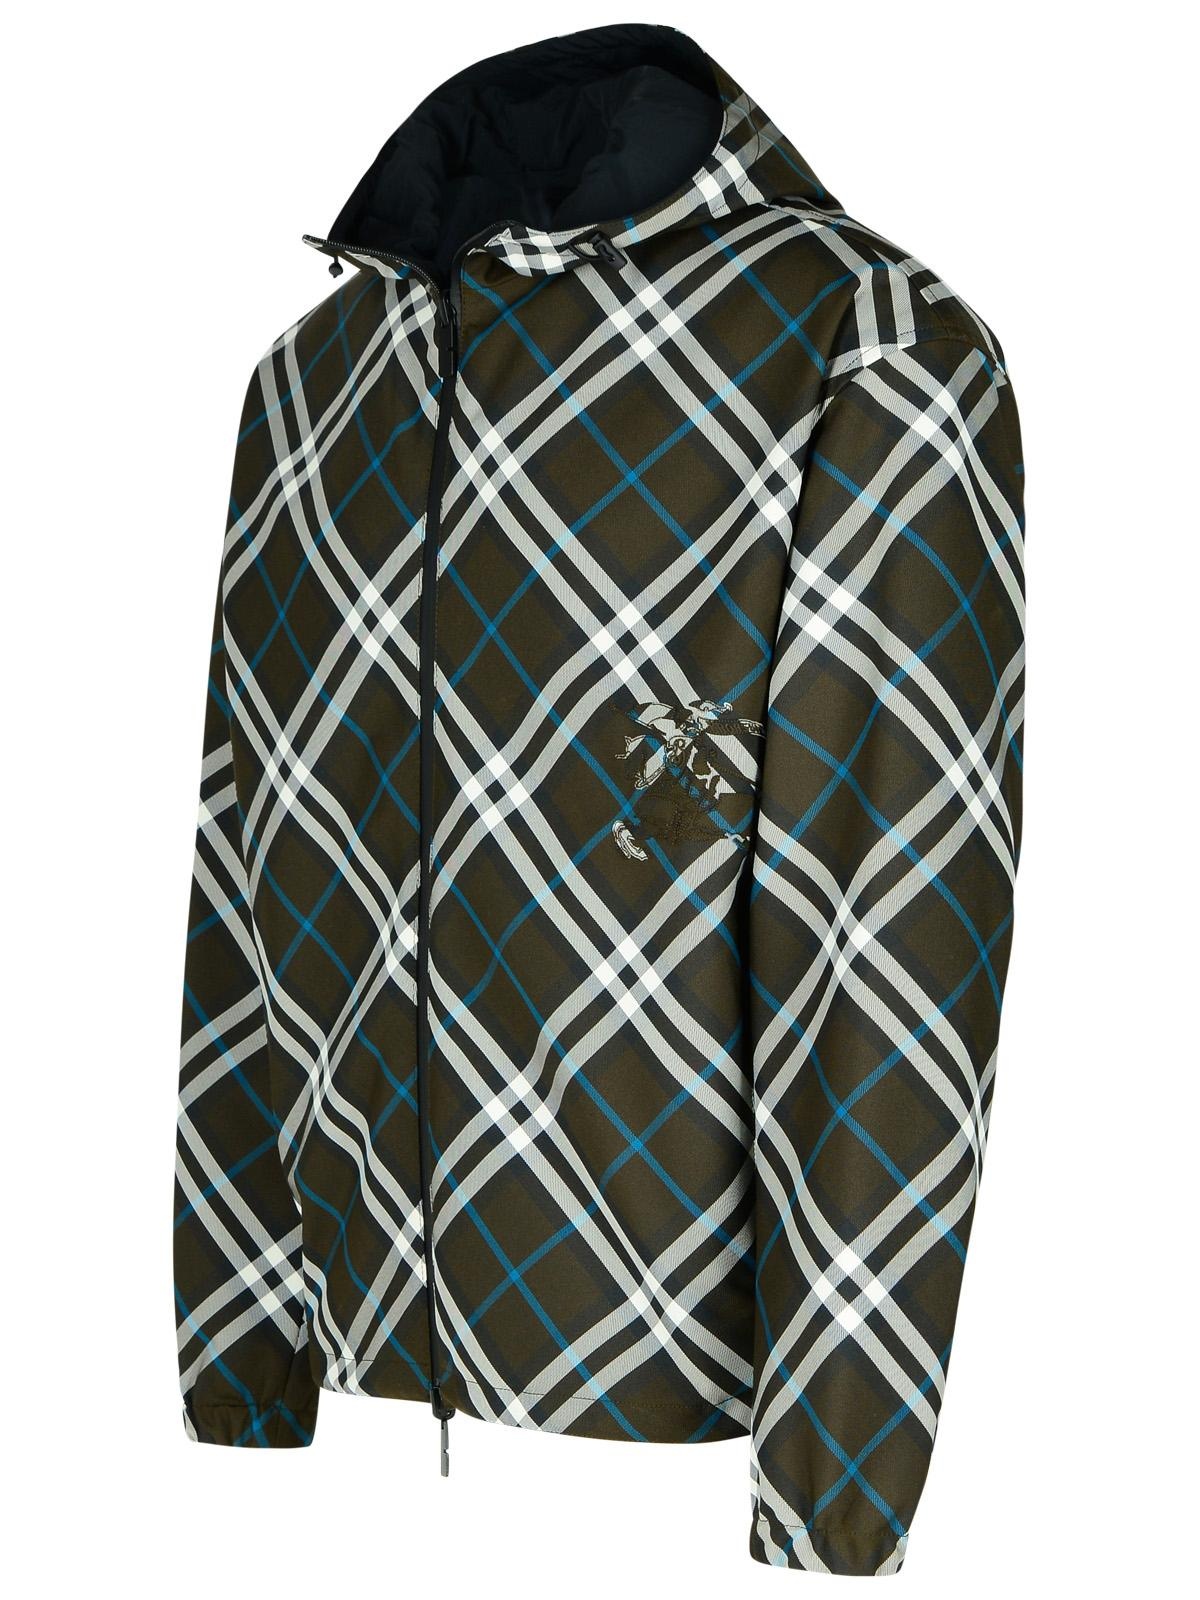 Burberry 'Check' Reversible Green Polyester Jacket Man - 2